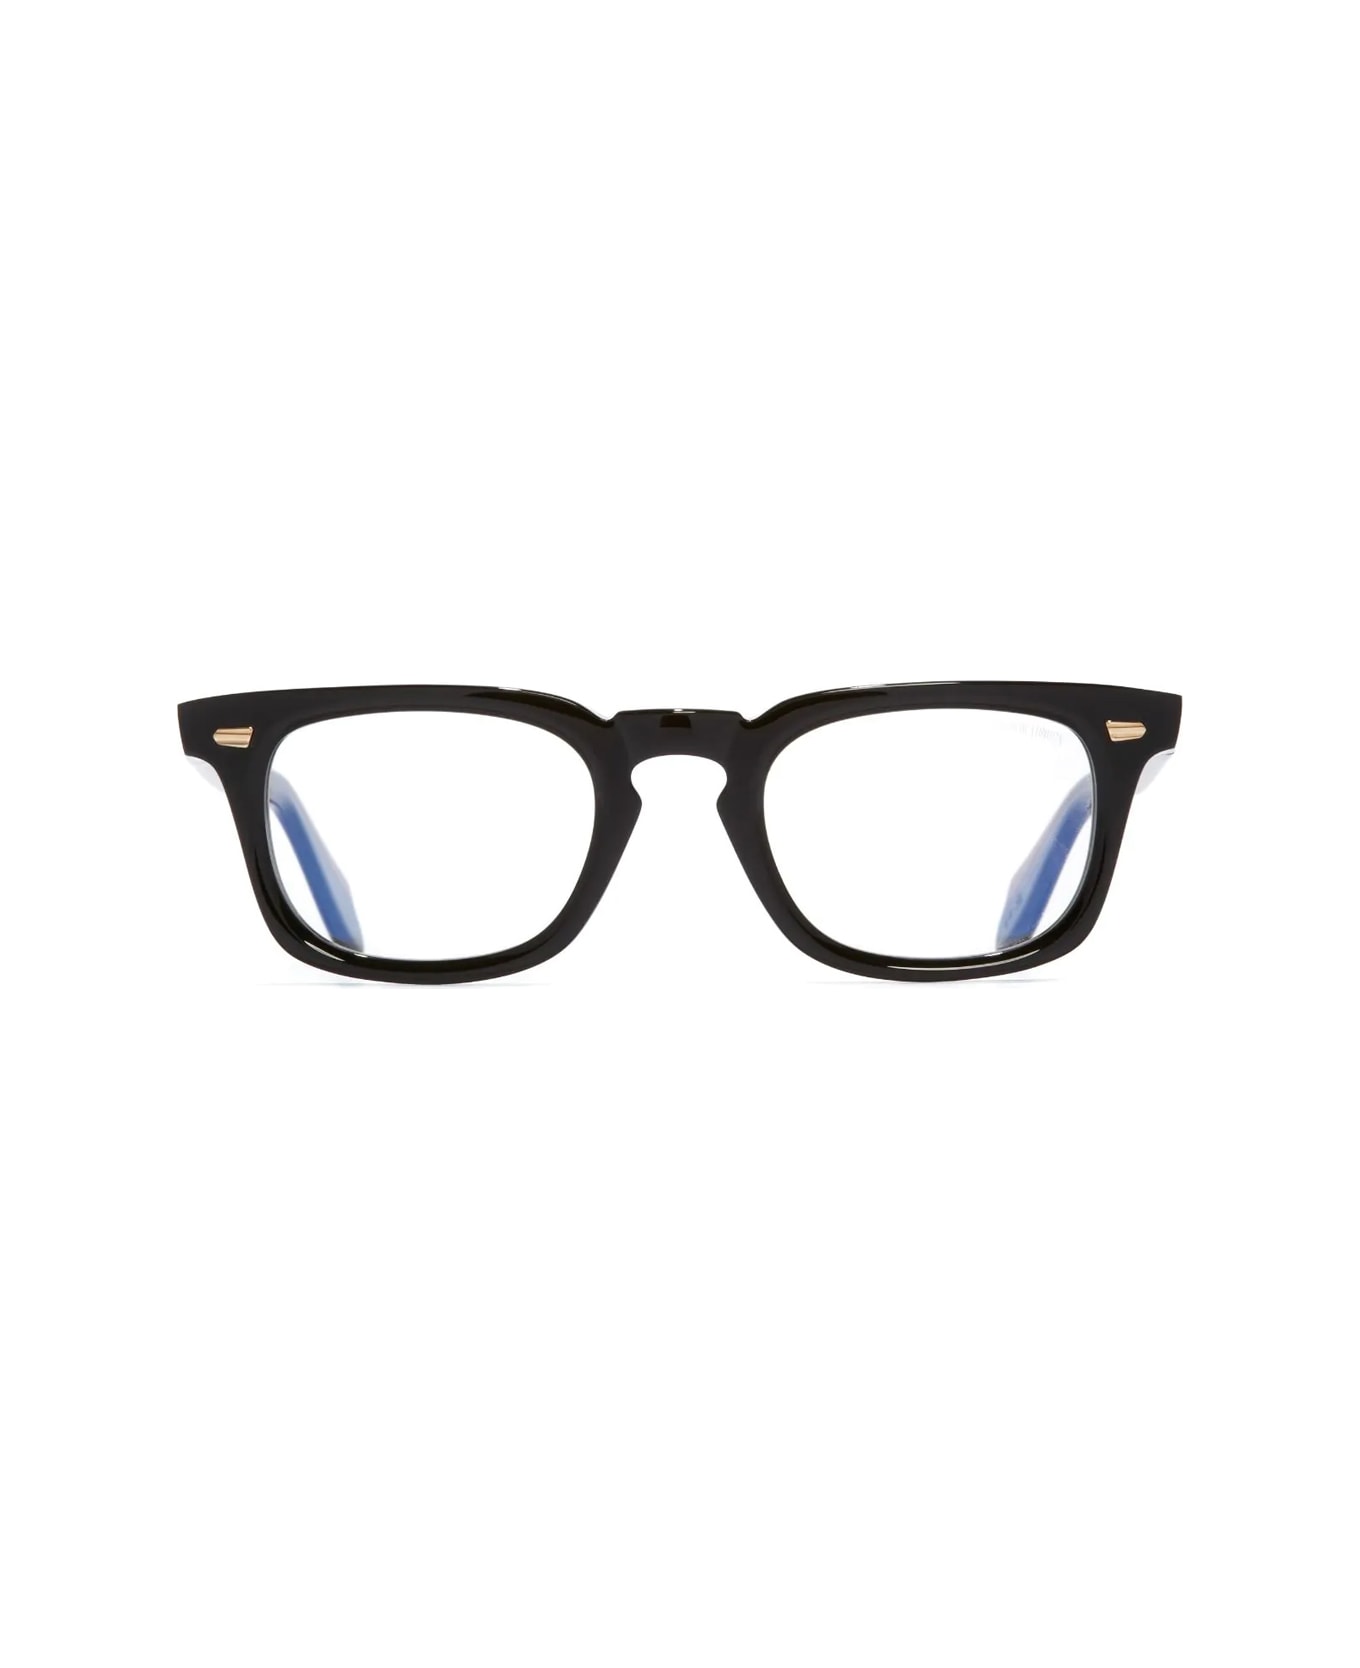 Cutler and Gross 1406 01 Glasses - Nero